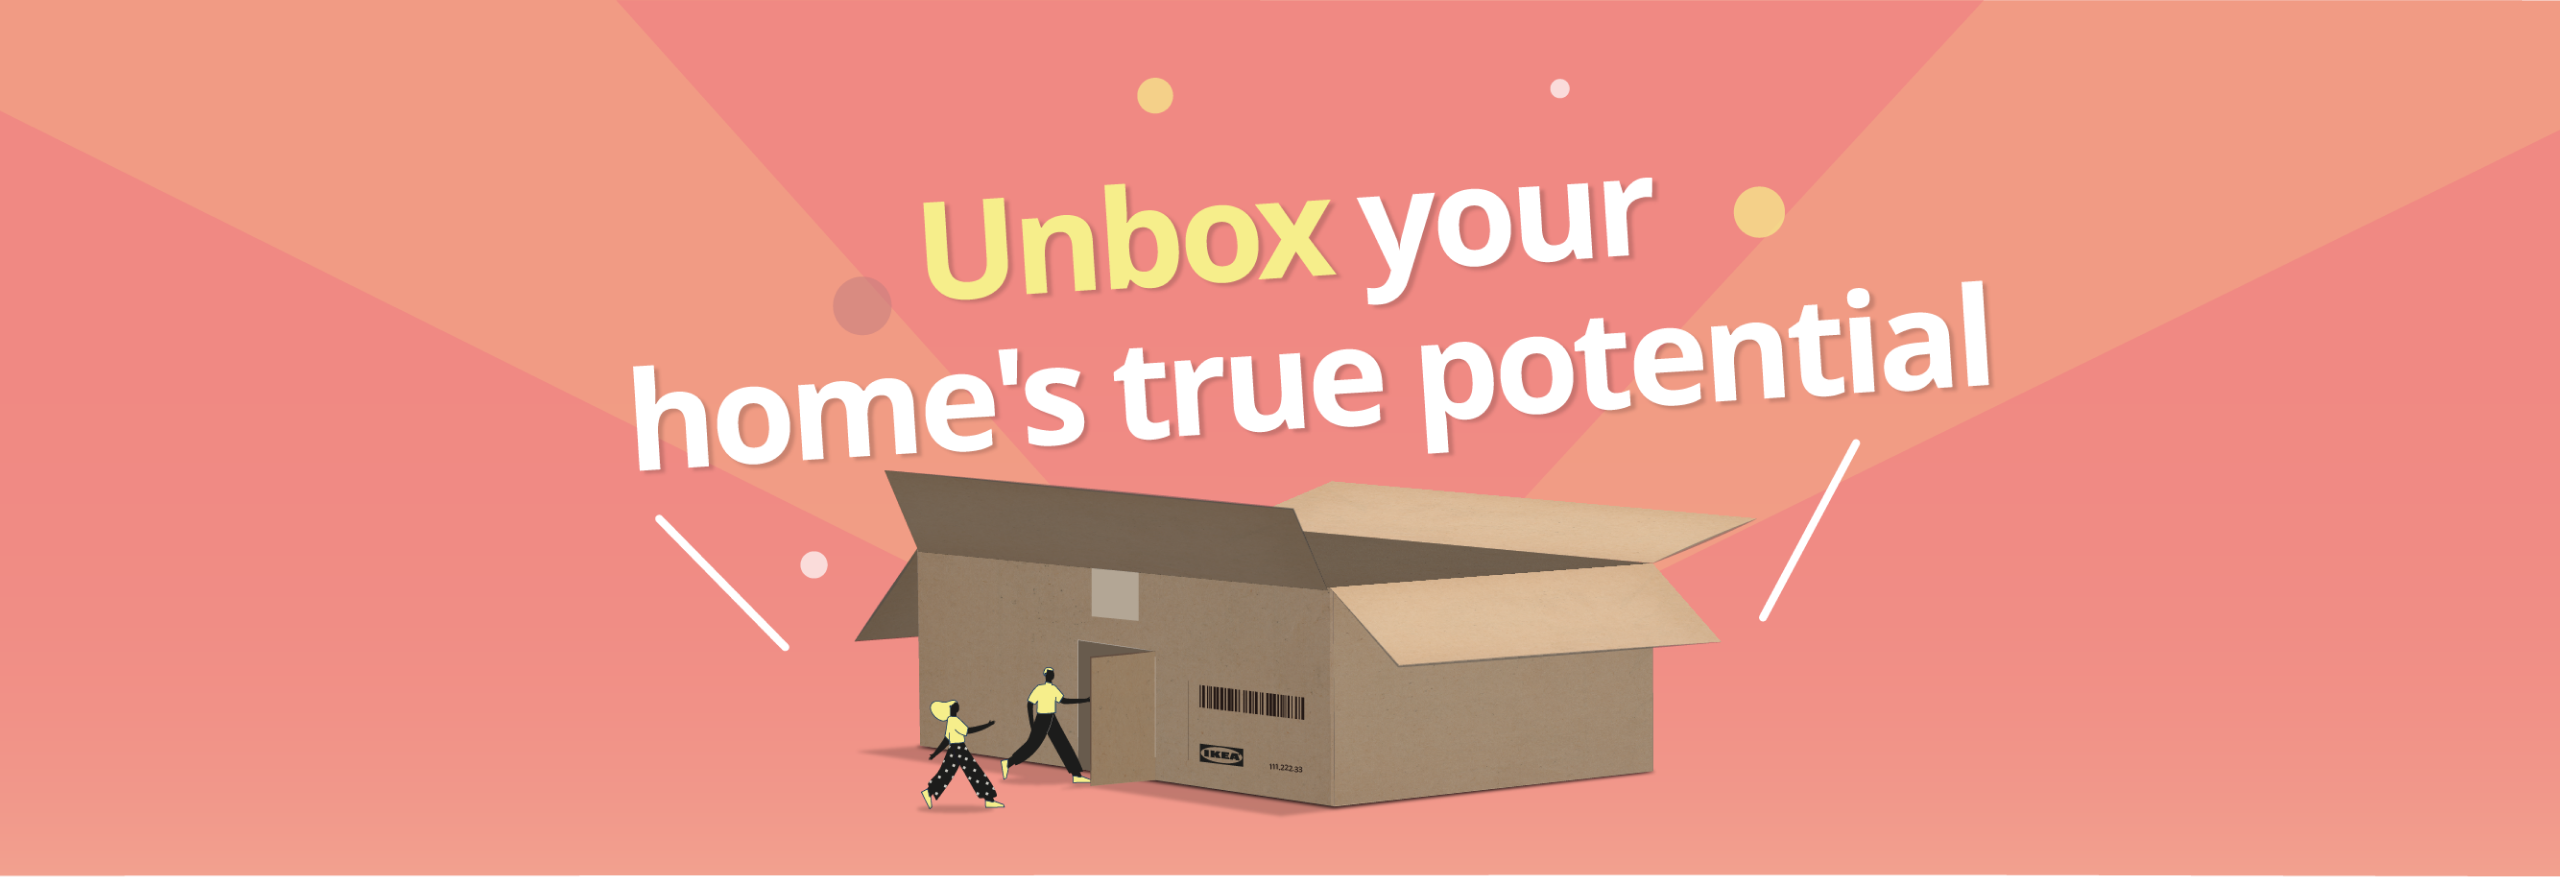 Unbox your homes' true potential